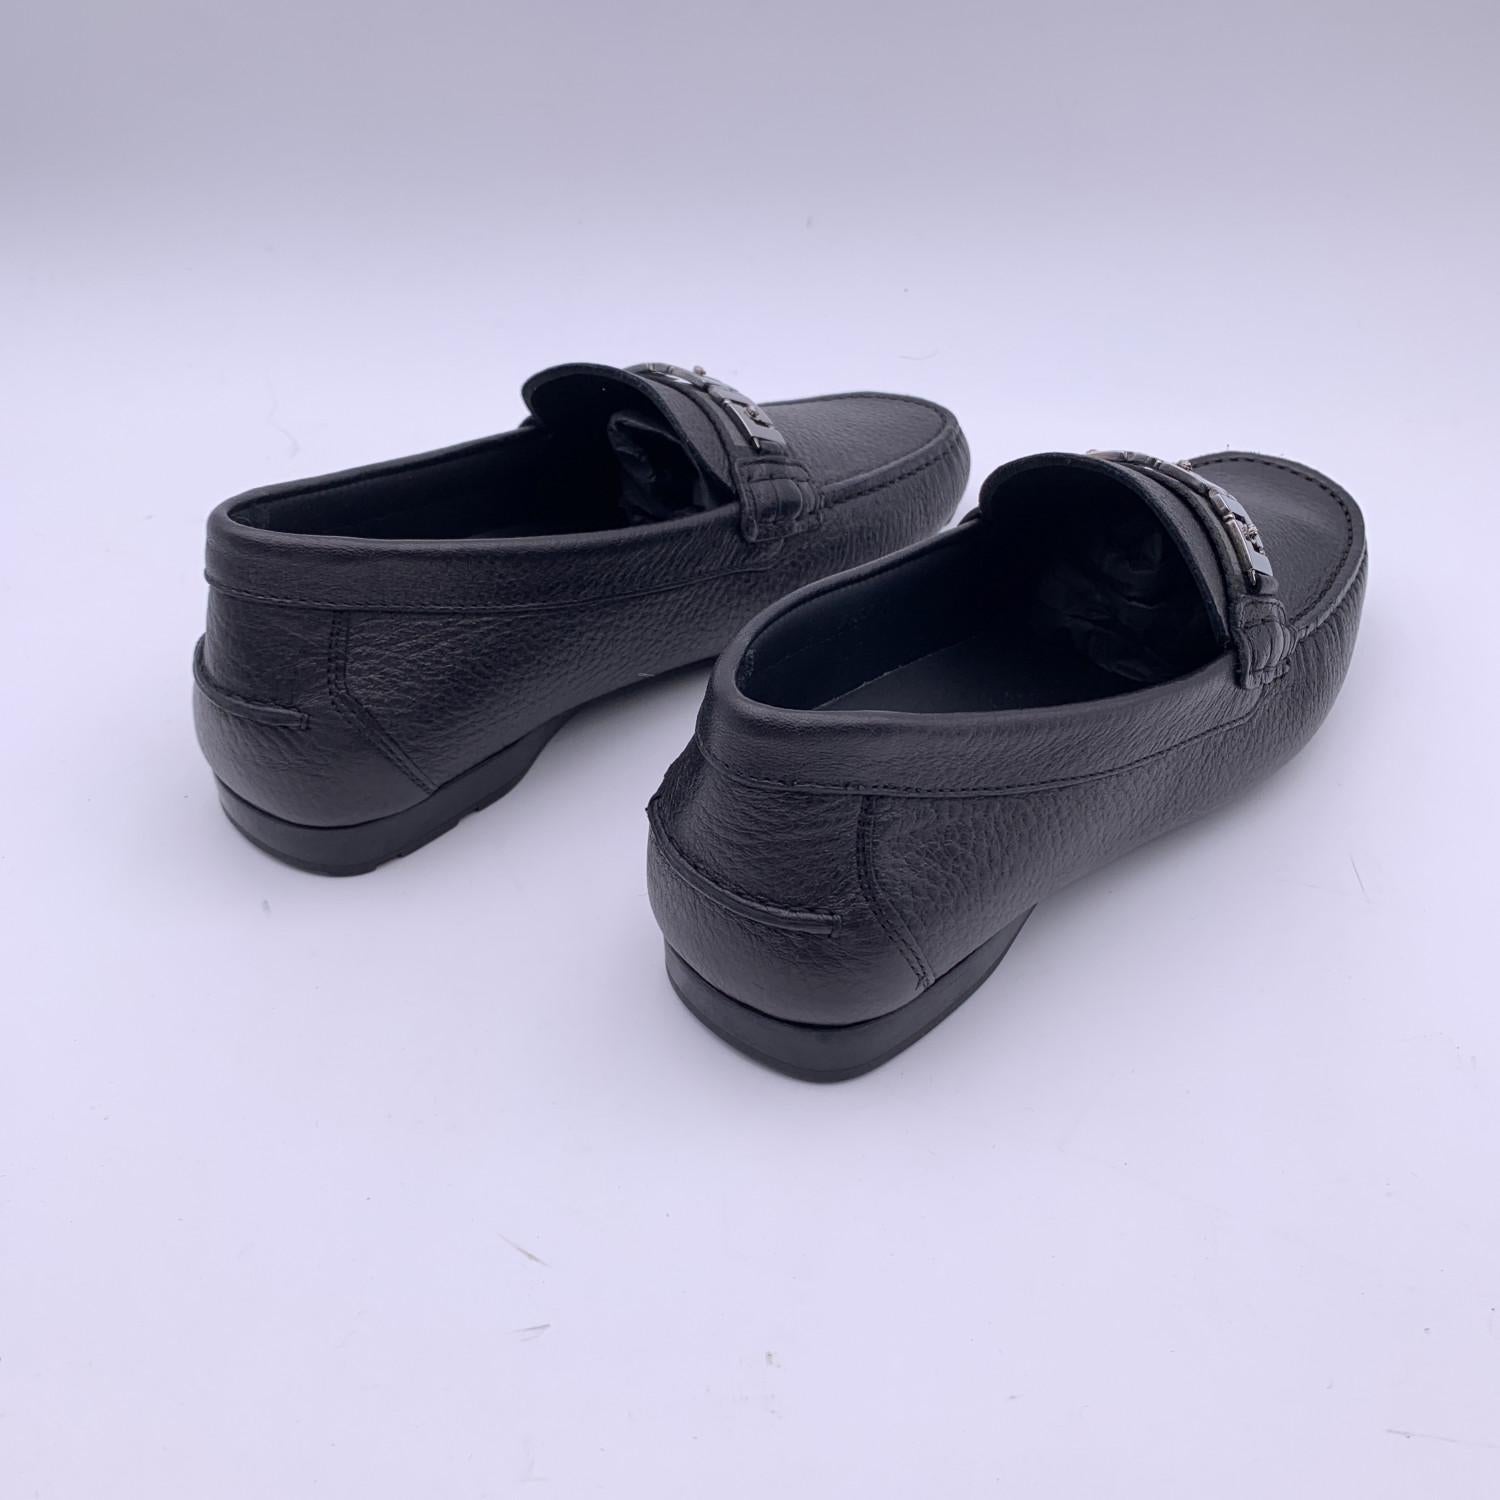 Versace Black Leather Mocassins Loafers Car Shoes Size 38.5 In New Condition For Sale In Rome, Rome